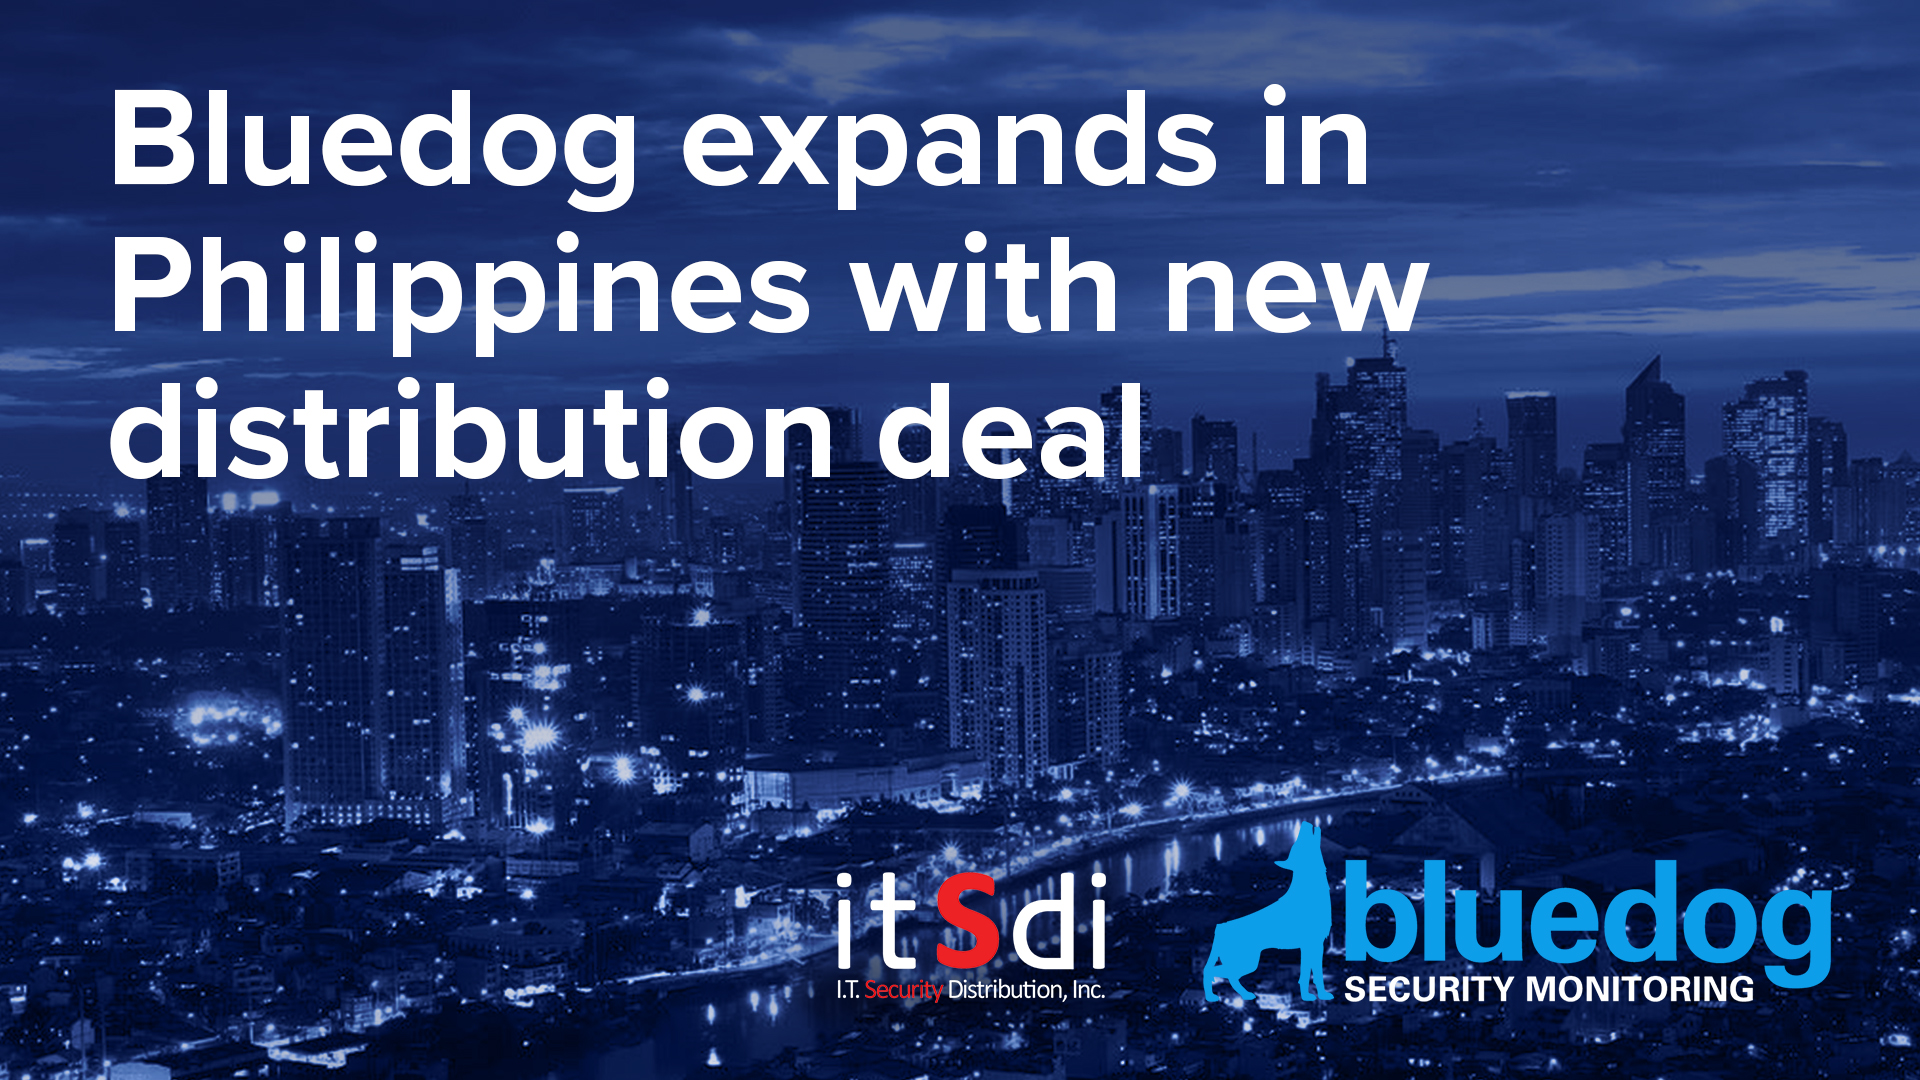 bluedog expands in Philippines with new distribution deal